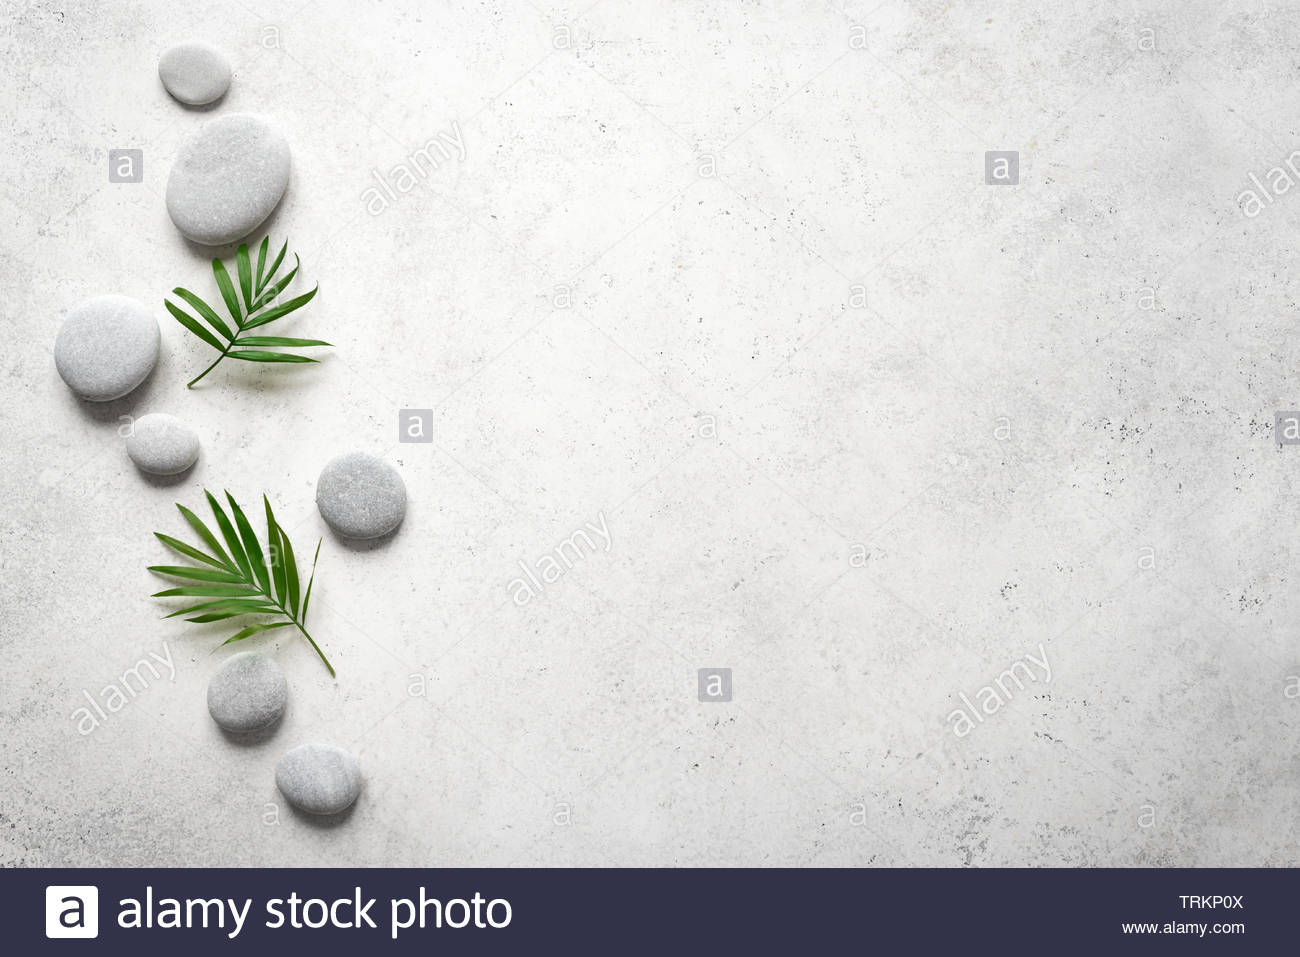 Spa Concept On White Stone Background Palm Leaves And Zen Like